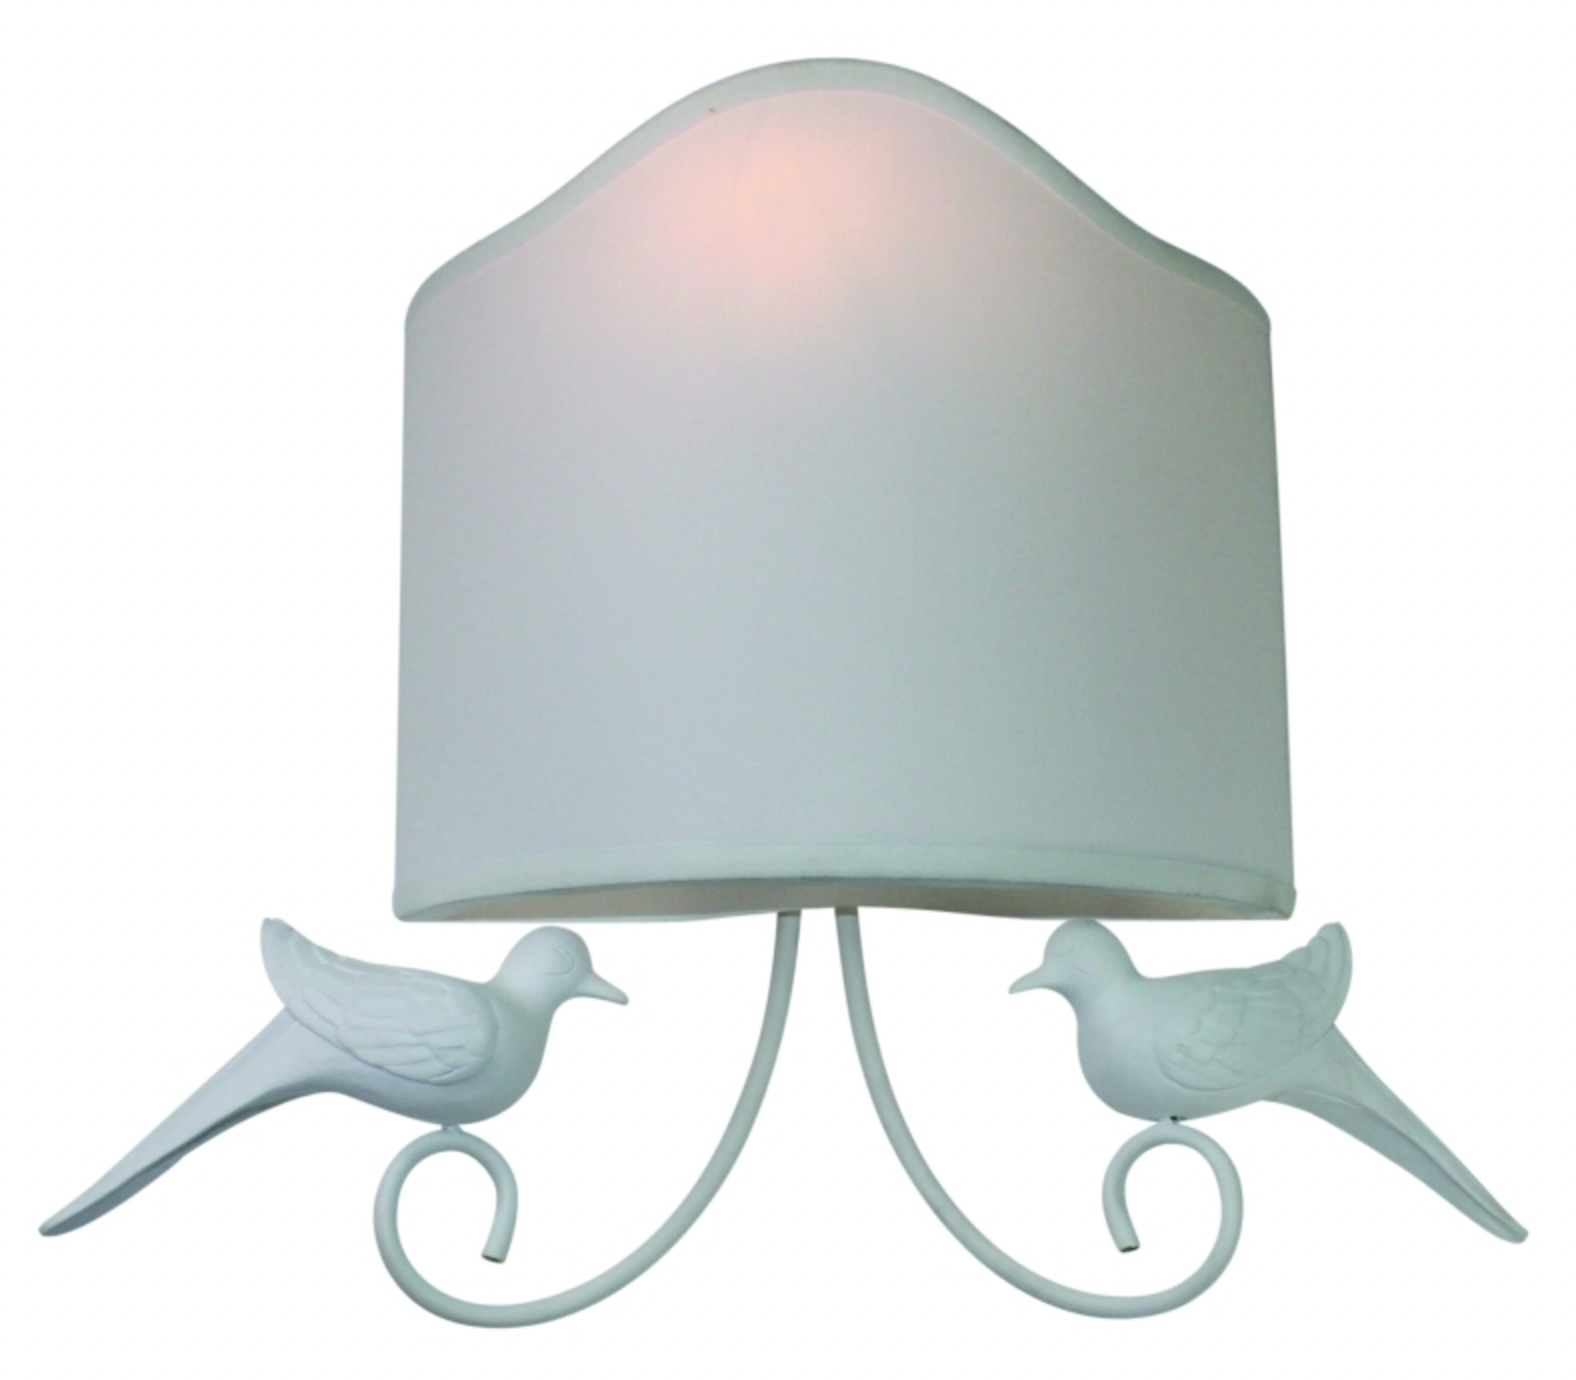 Carleton's Dove Wall Sconce